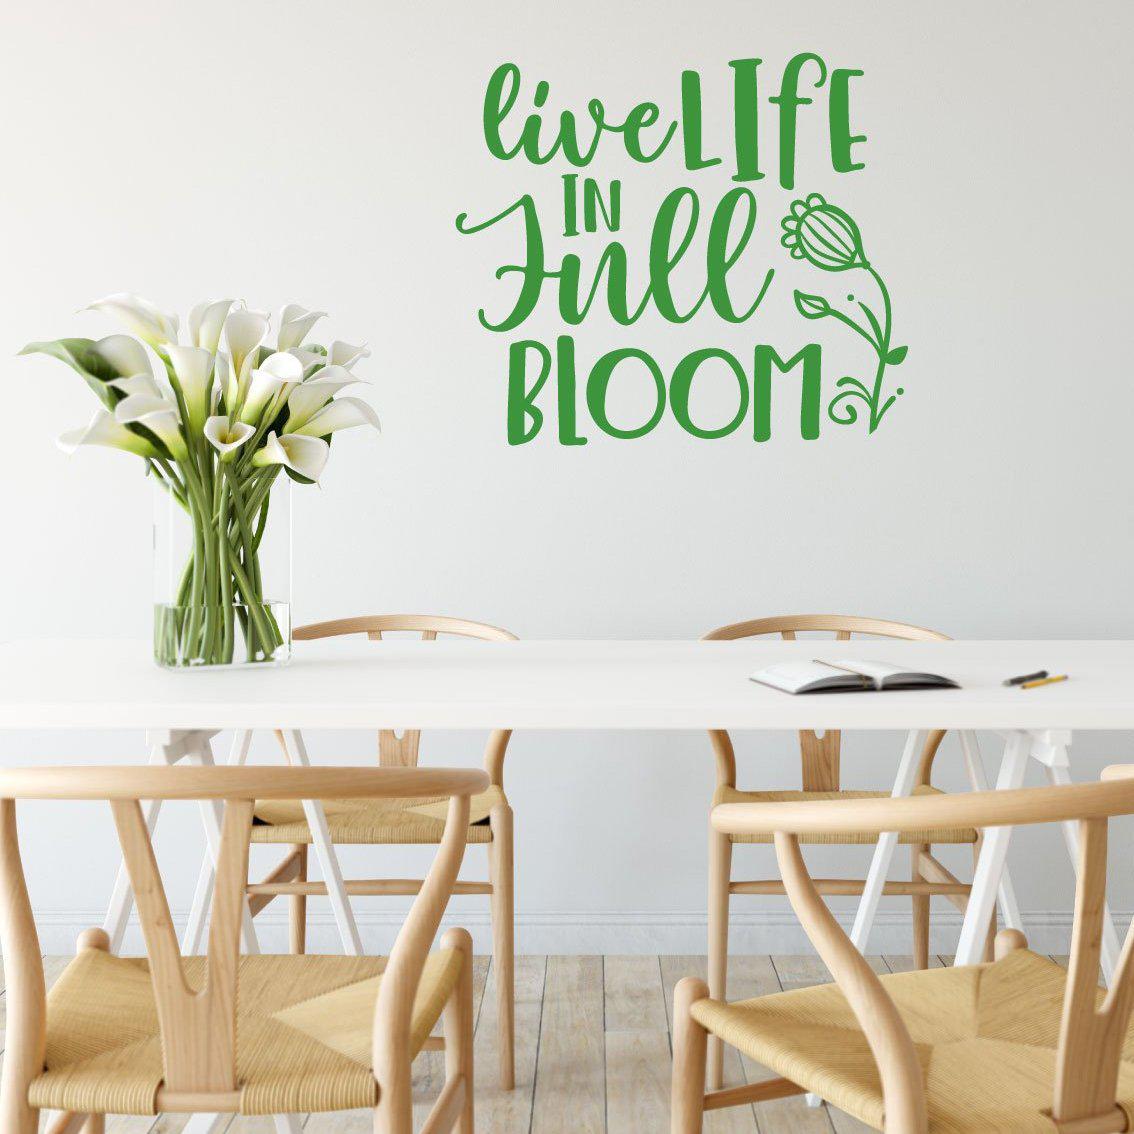 Live Life In Full Bloom Motivational Wall Sticker Quote